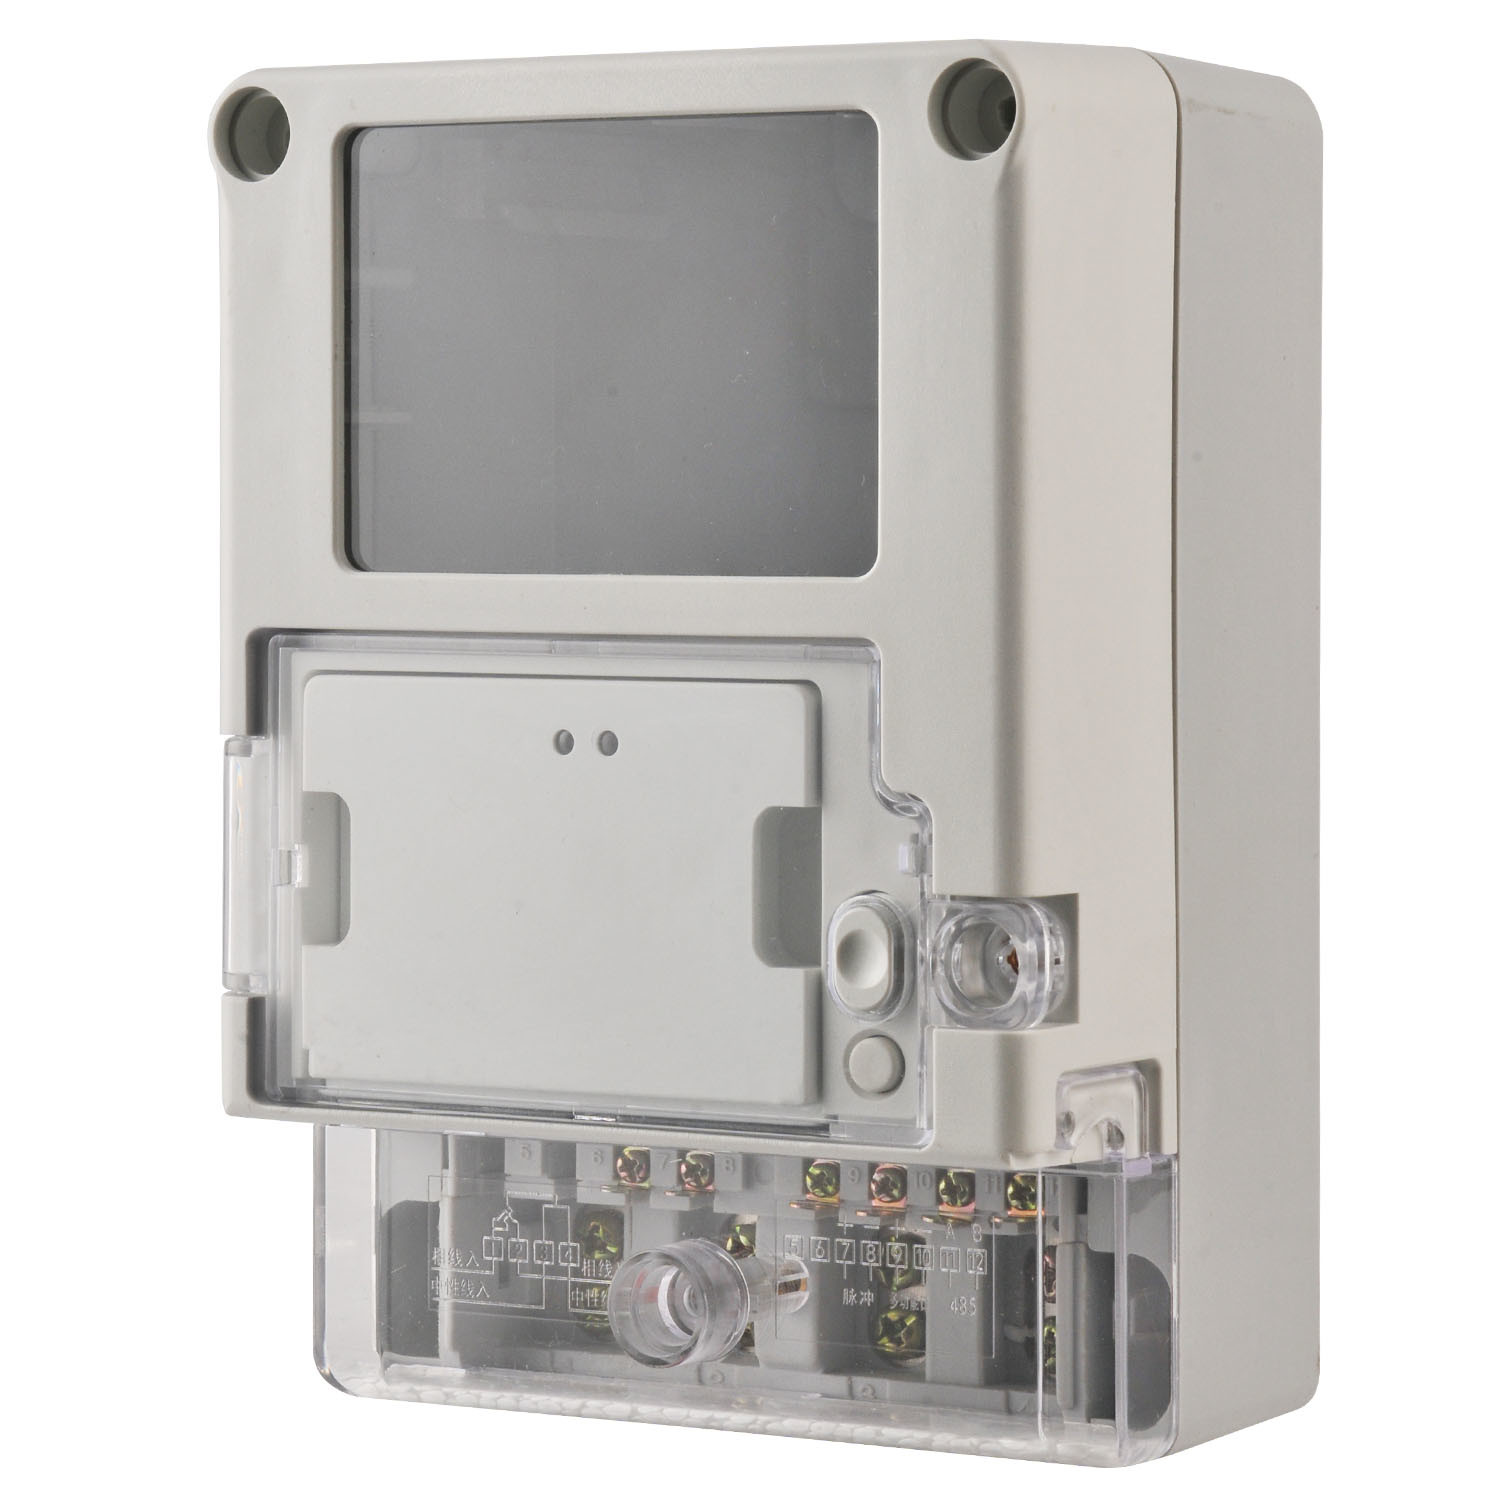 Dds-2060-9 Made in China Electric Plastic Meter Enclosure